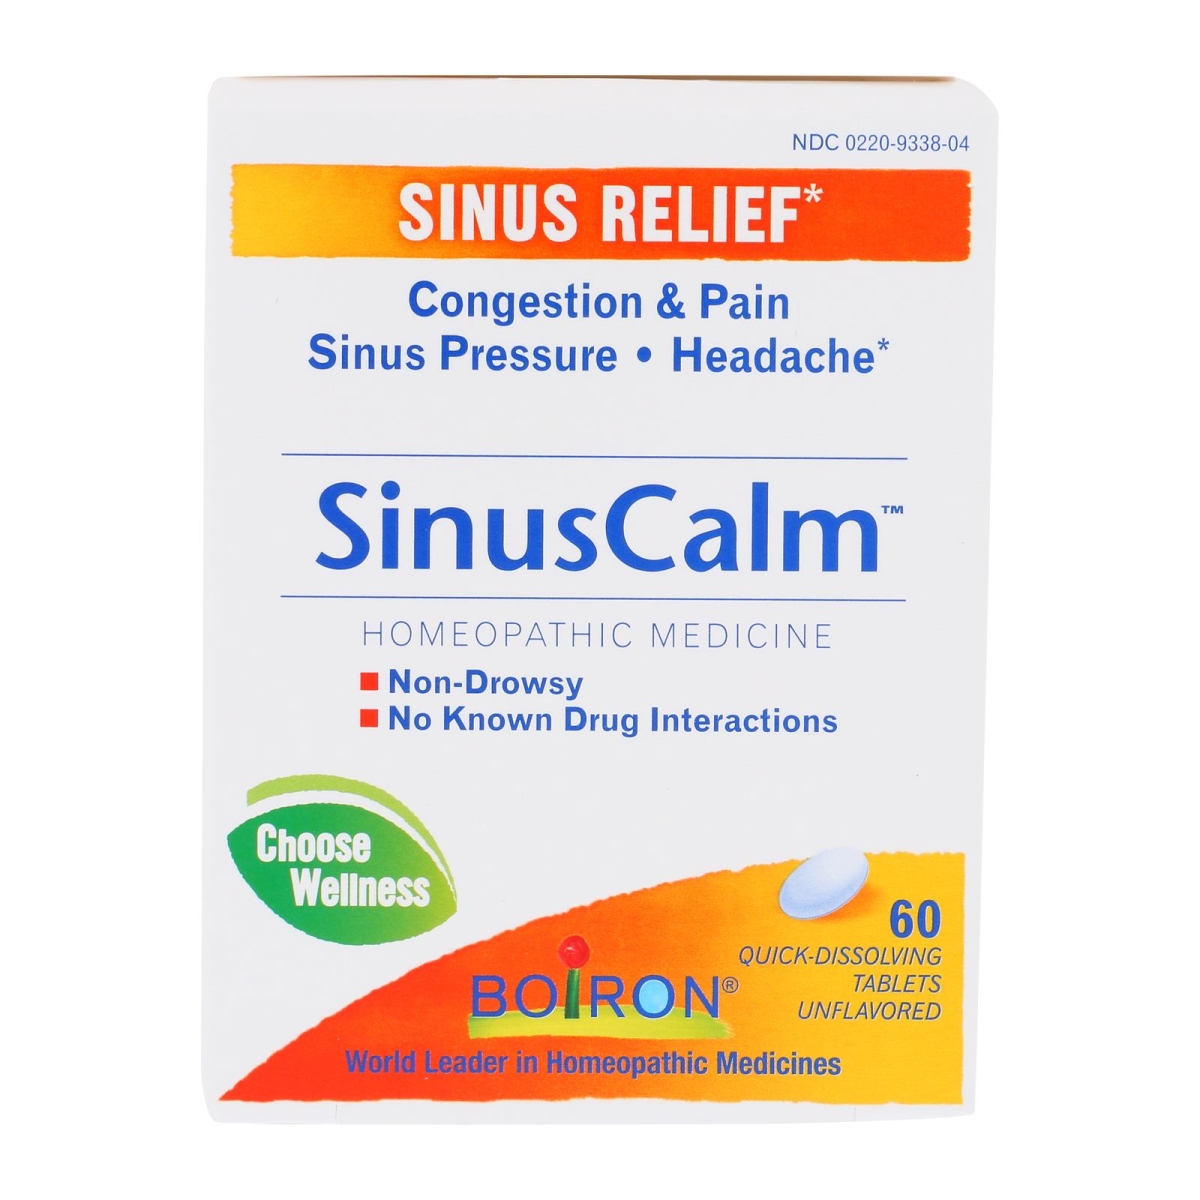 Picture of Boiron HG2480101 Sinus Calm Sinus Relief Homeopathic Medicine - 60 Tablets